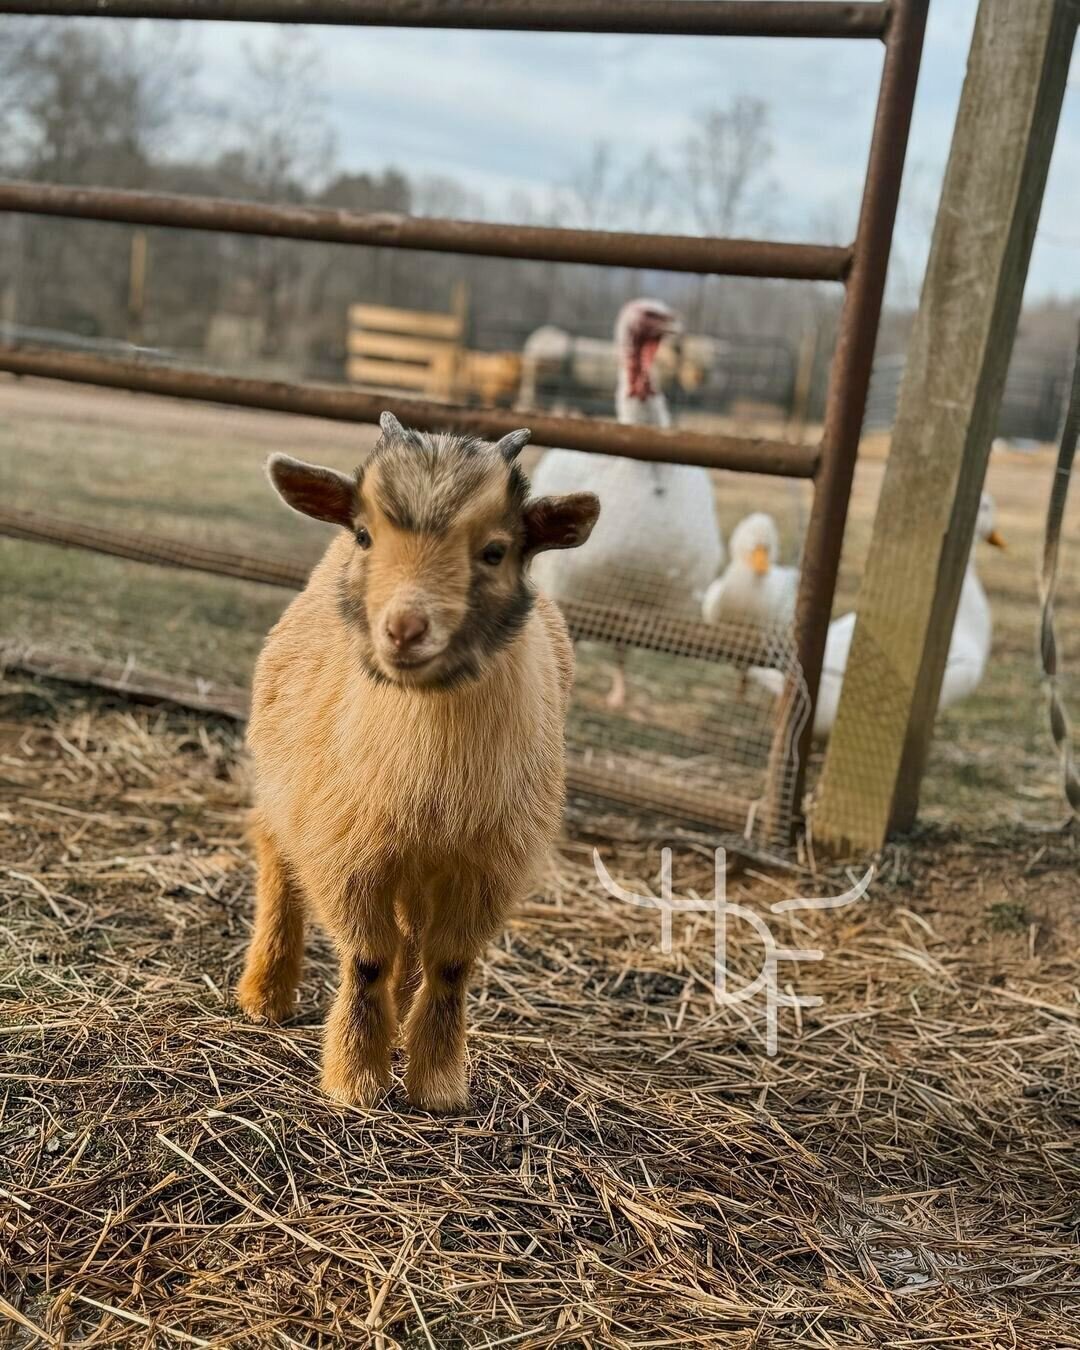 Spotlight on our adorable farm friends! 😍 Meet some of the charming animals at farms across NC waiting for YOU to visit! 🫵

Let&rsquo;s introduce you (in order of appearance!) 📸
➡️ Tarzan from @happydashfarm
➡️ Coira from @paradisefamilyfarm
➡️ Pr